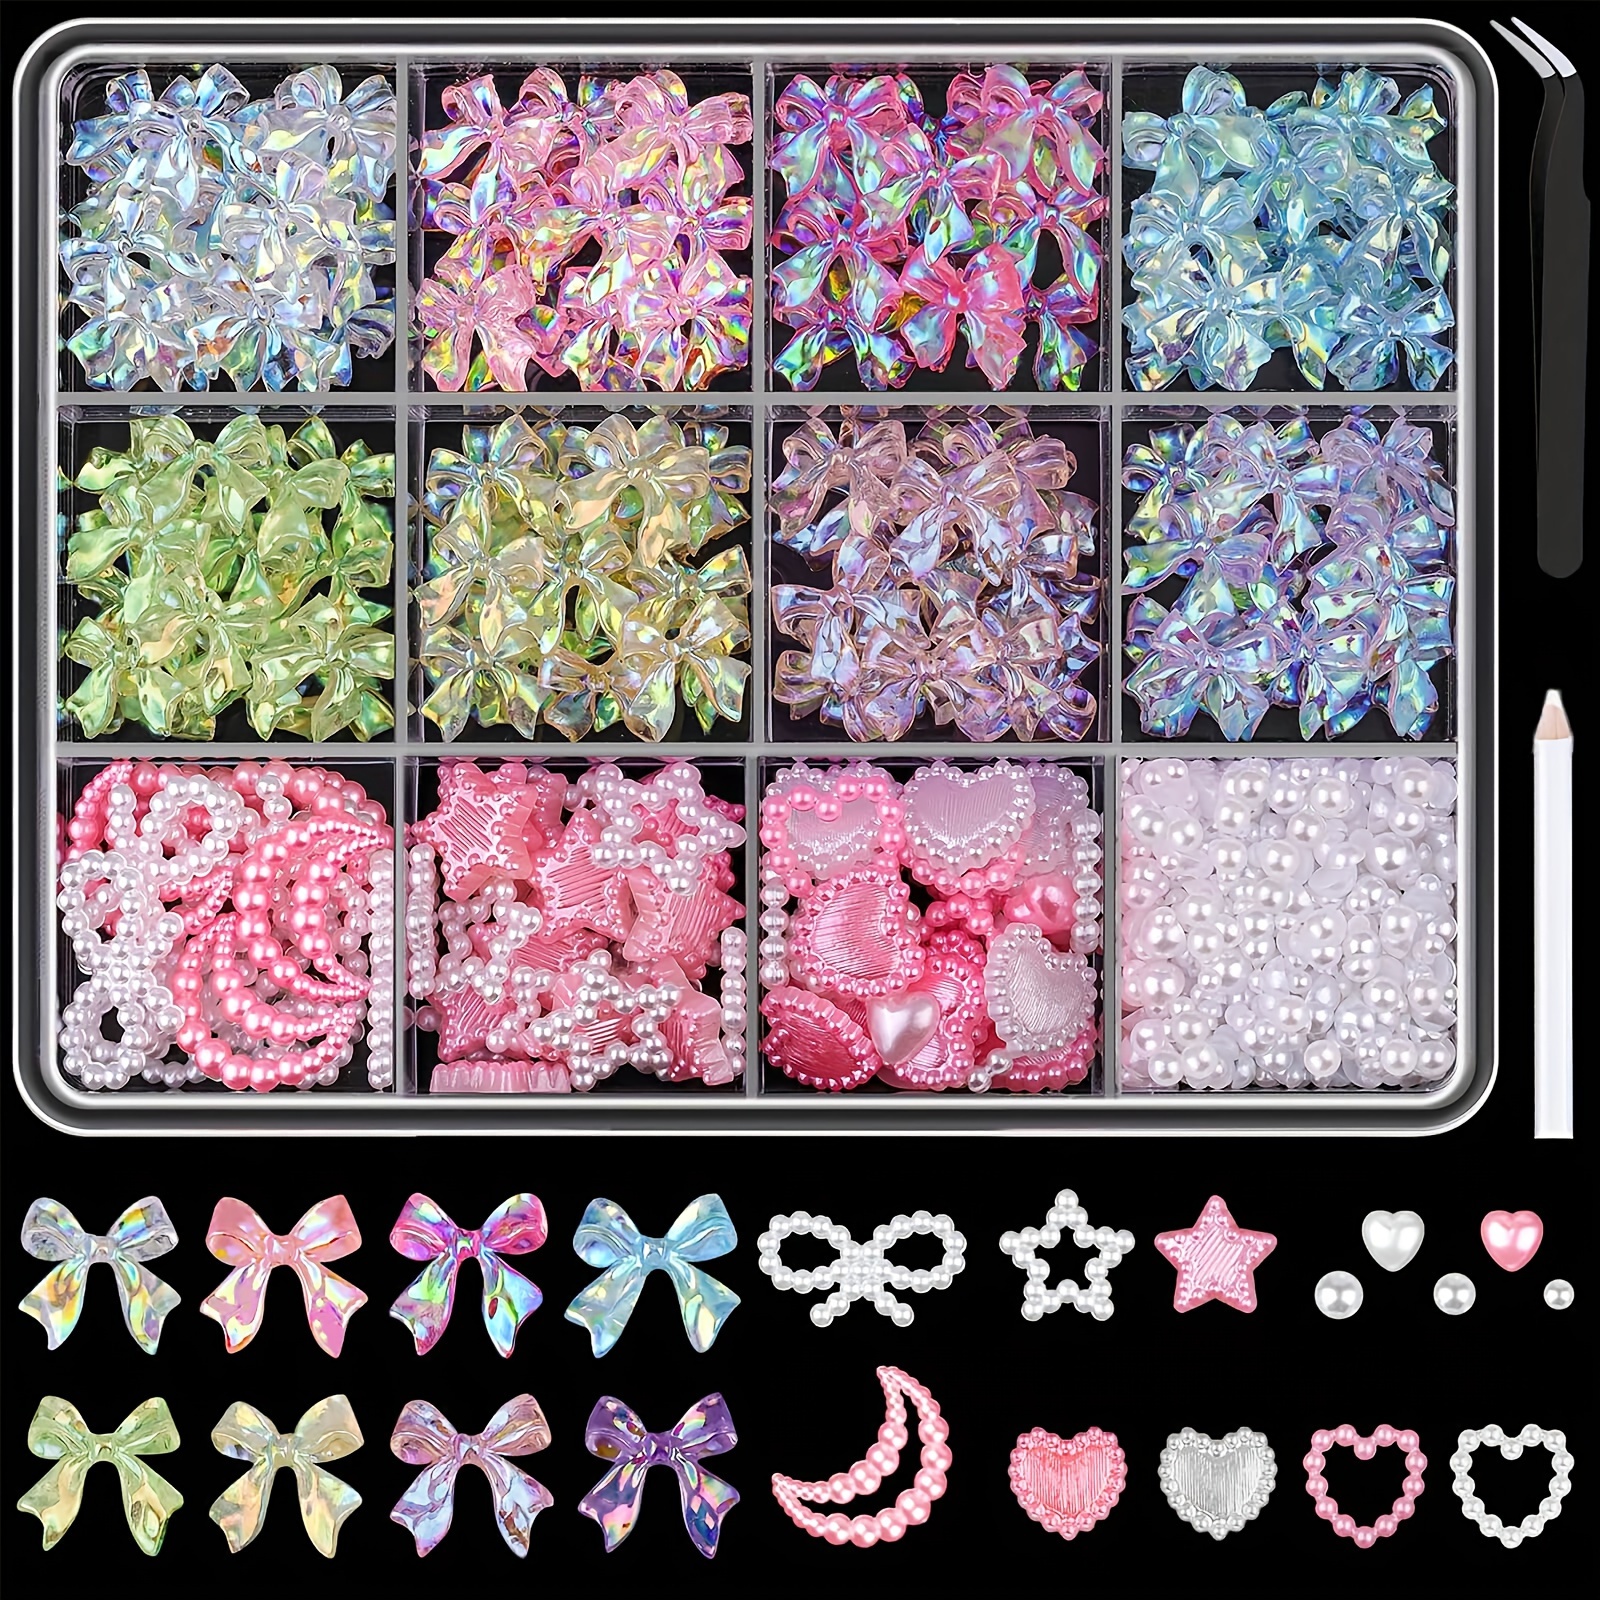 

500pcs 3d Nail Art Charms And Pearls Set, Shiny Bow Rhinestones, Pink & White Hearts Stars Moons, Nail Diy Decoration With Tweezers And Picker Pencil